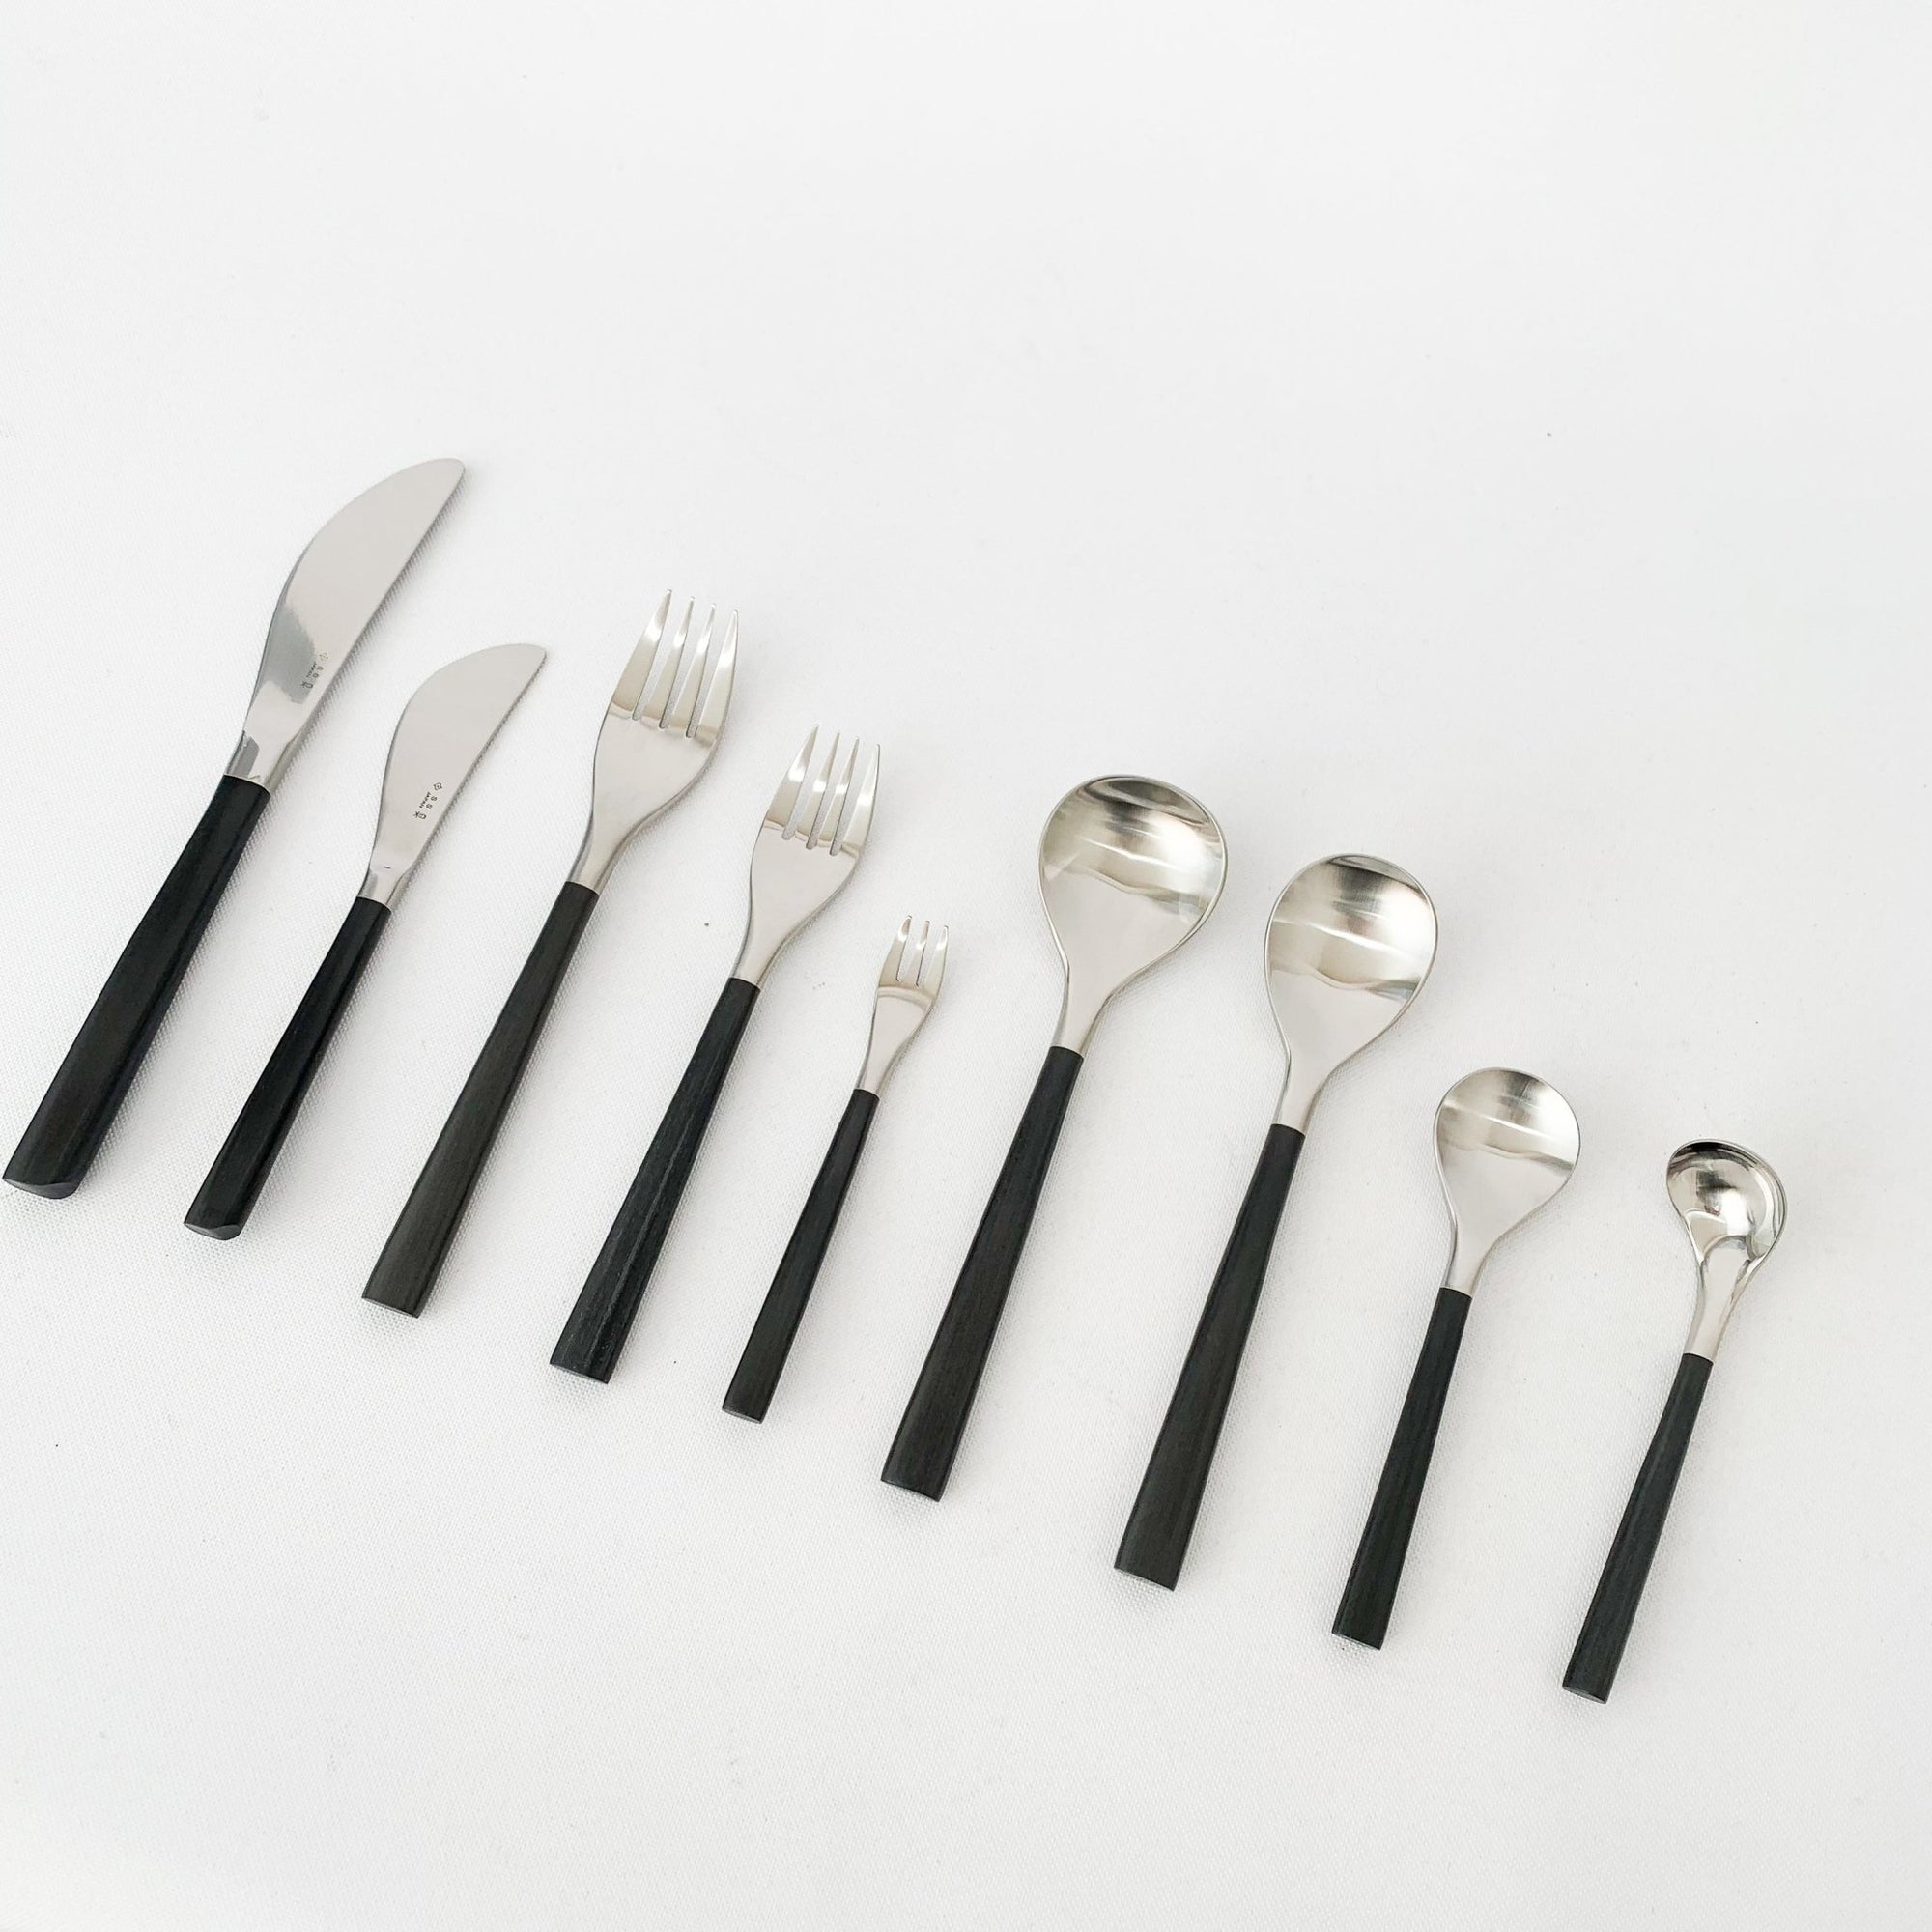 CUTLERY SET WITH HANDLE DETAIL (SET OF 4) - Blue gray - Zara